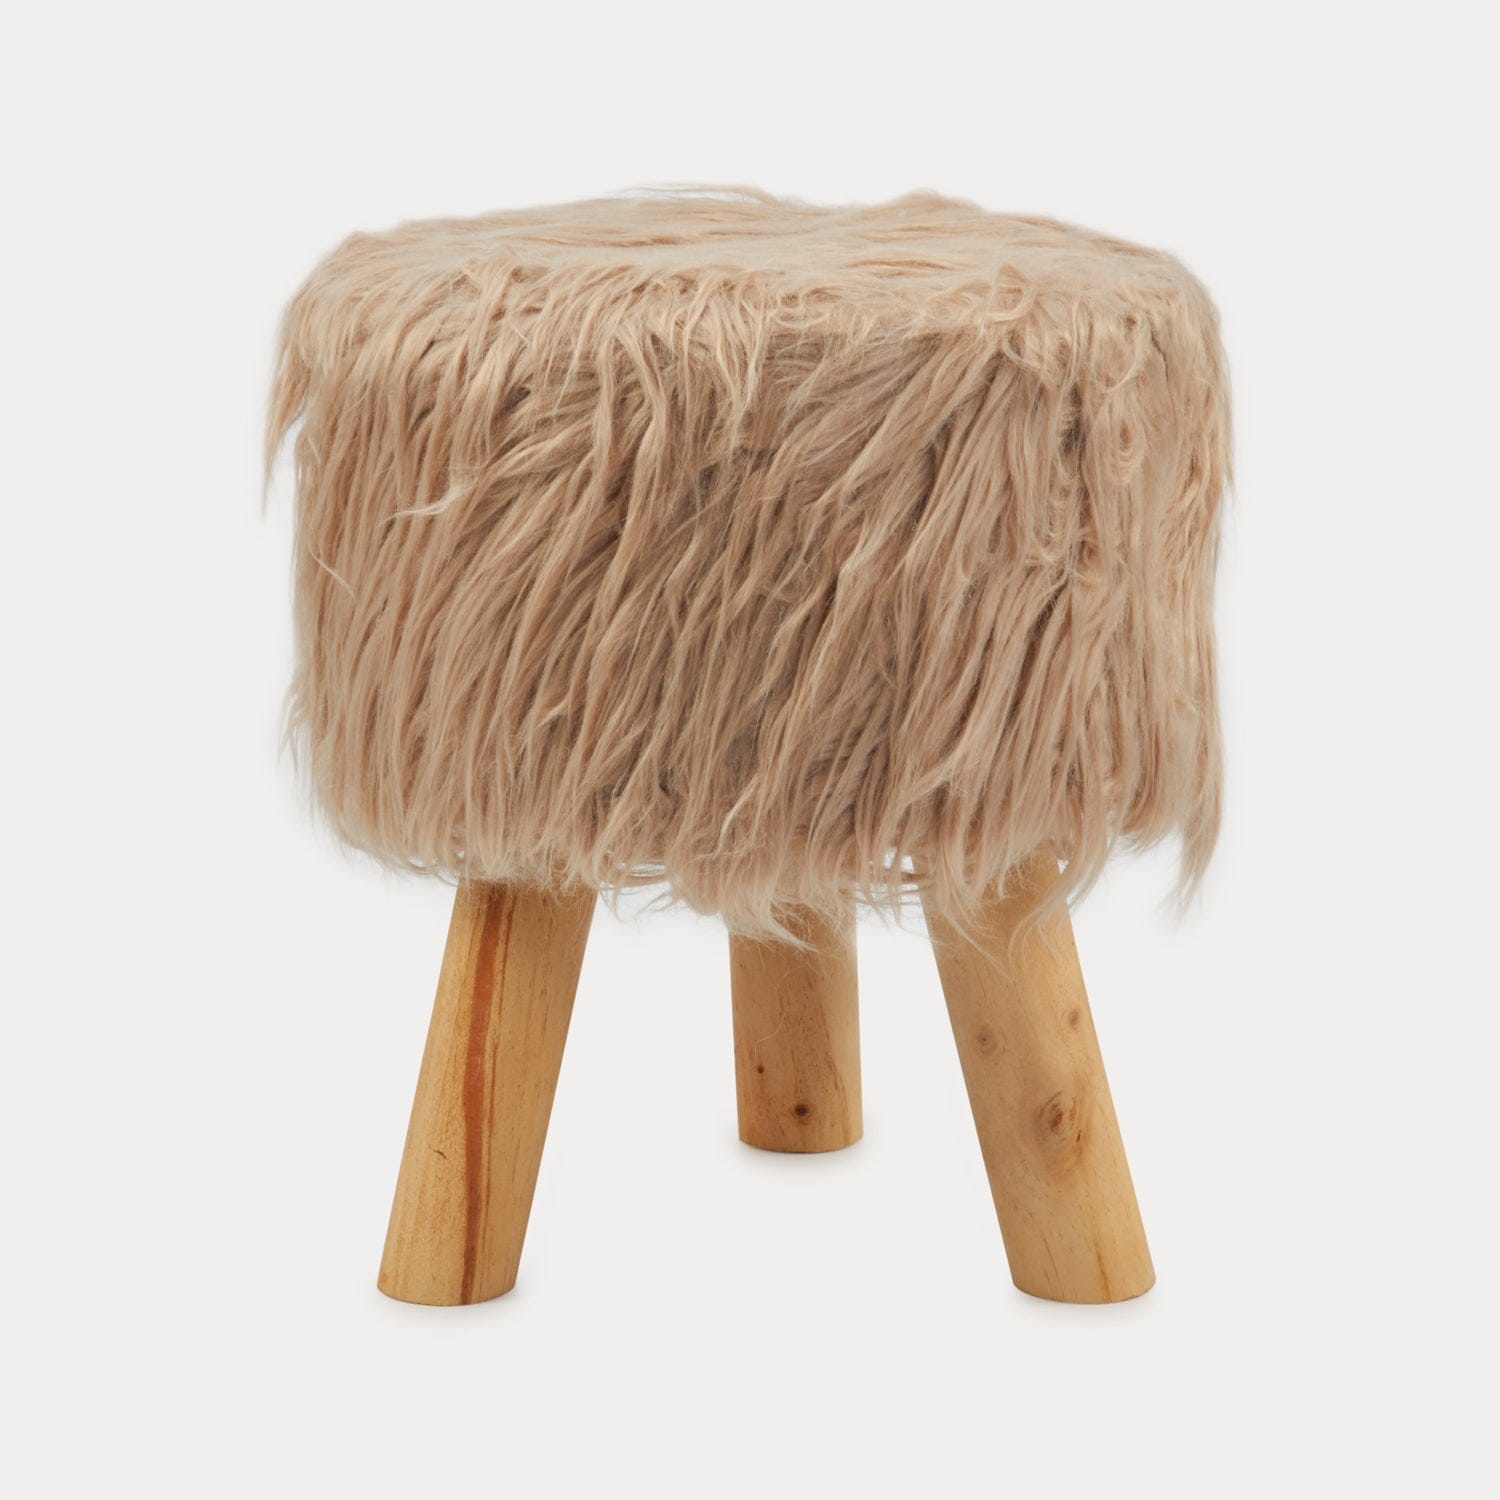 Red Butler Pouffe Farn top Pouffe- Beige PSFT00F14Y19A3 SFT14A3 Compact Velvet Pouffe Stool – Elegant Accent for Small Spaces Redbutler